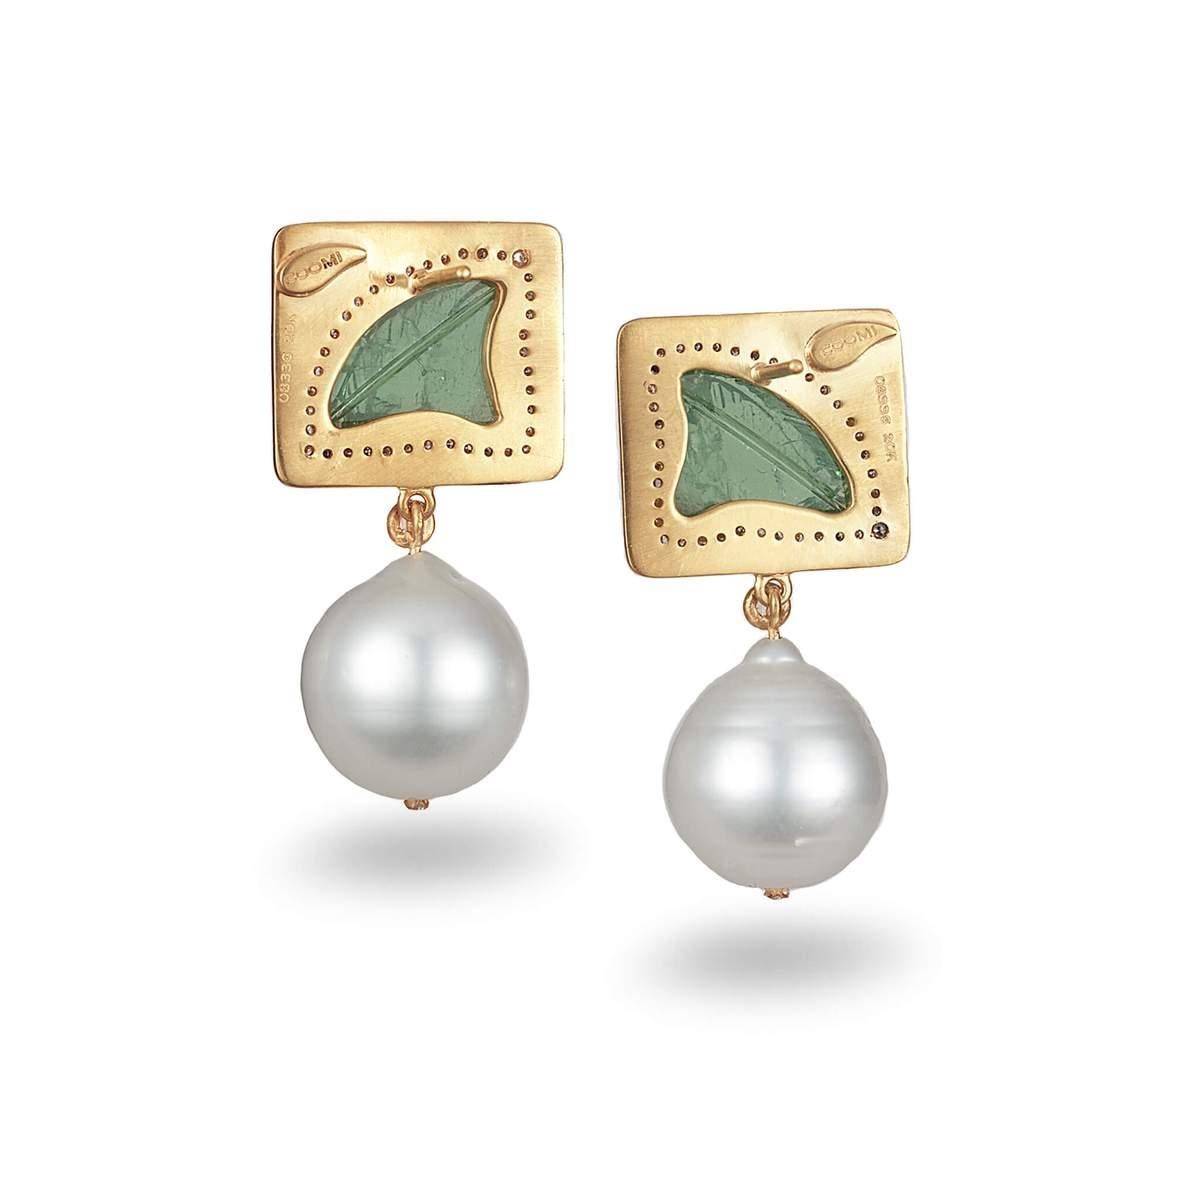 Hand made Coomi Affinity collection earrings set in 20K yellow gold with 12.50cts tsavorite, 36.80cts white pearls, and 0.63cts diamonds.